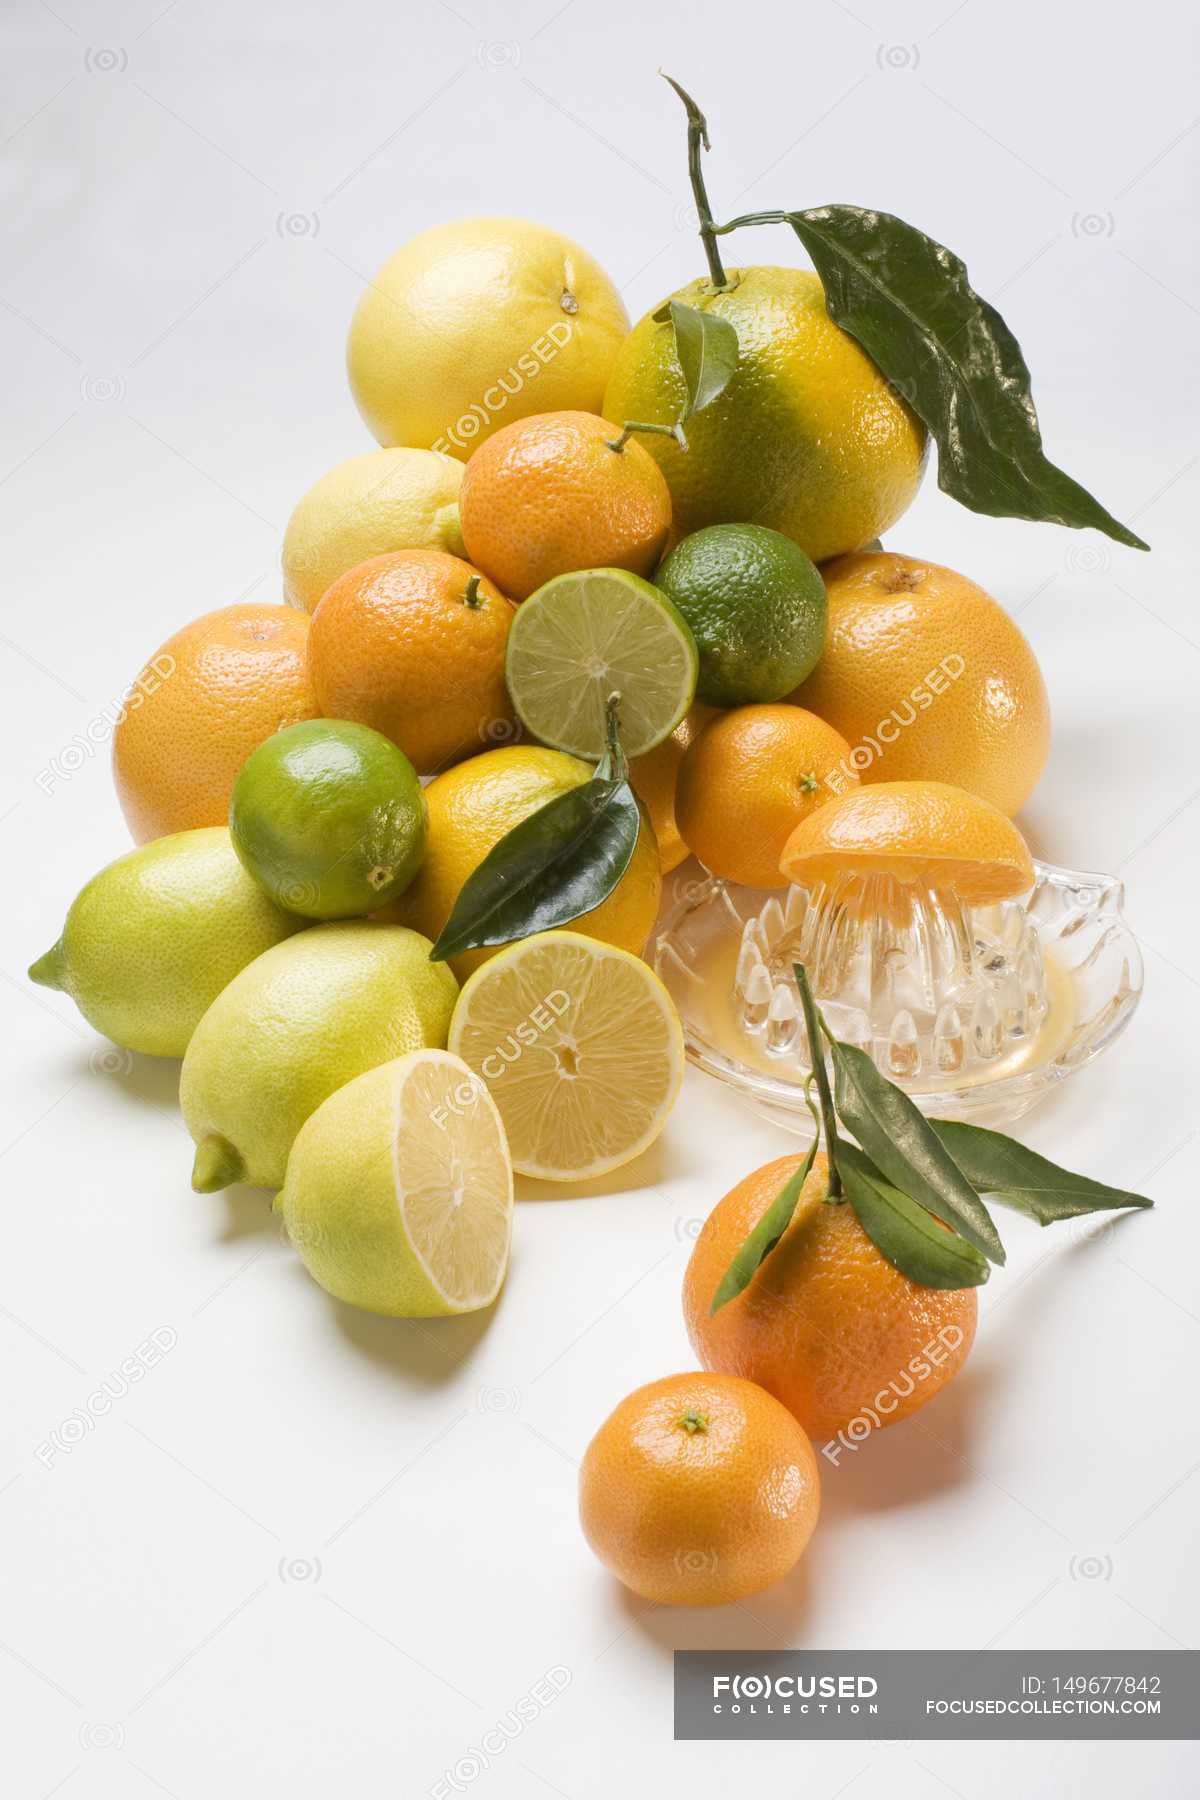 Assorted citrus fruits in heap — Stock Photo | #149677842